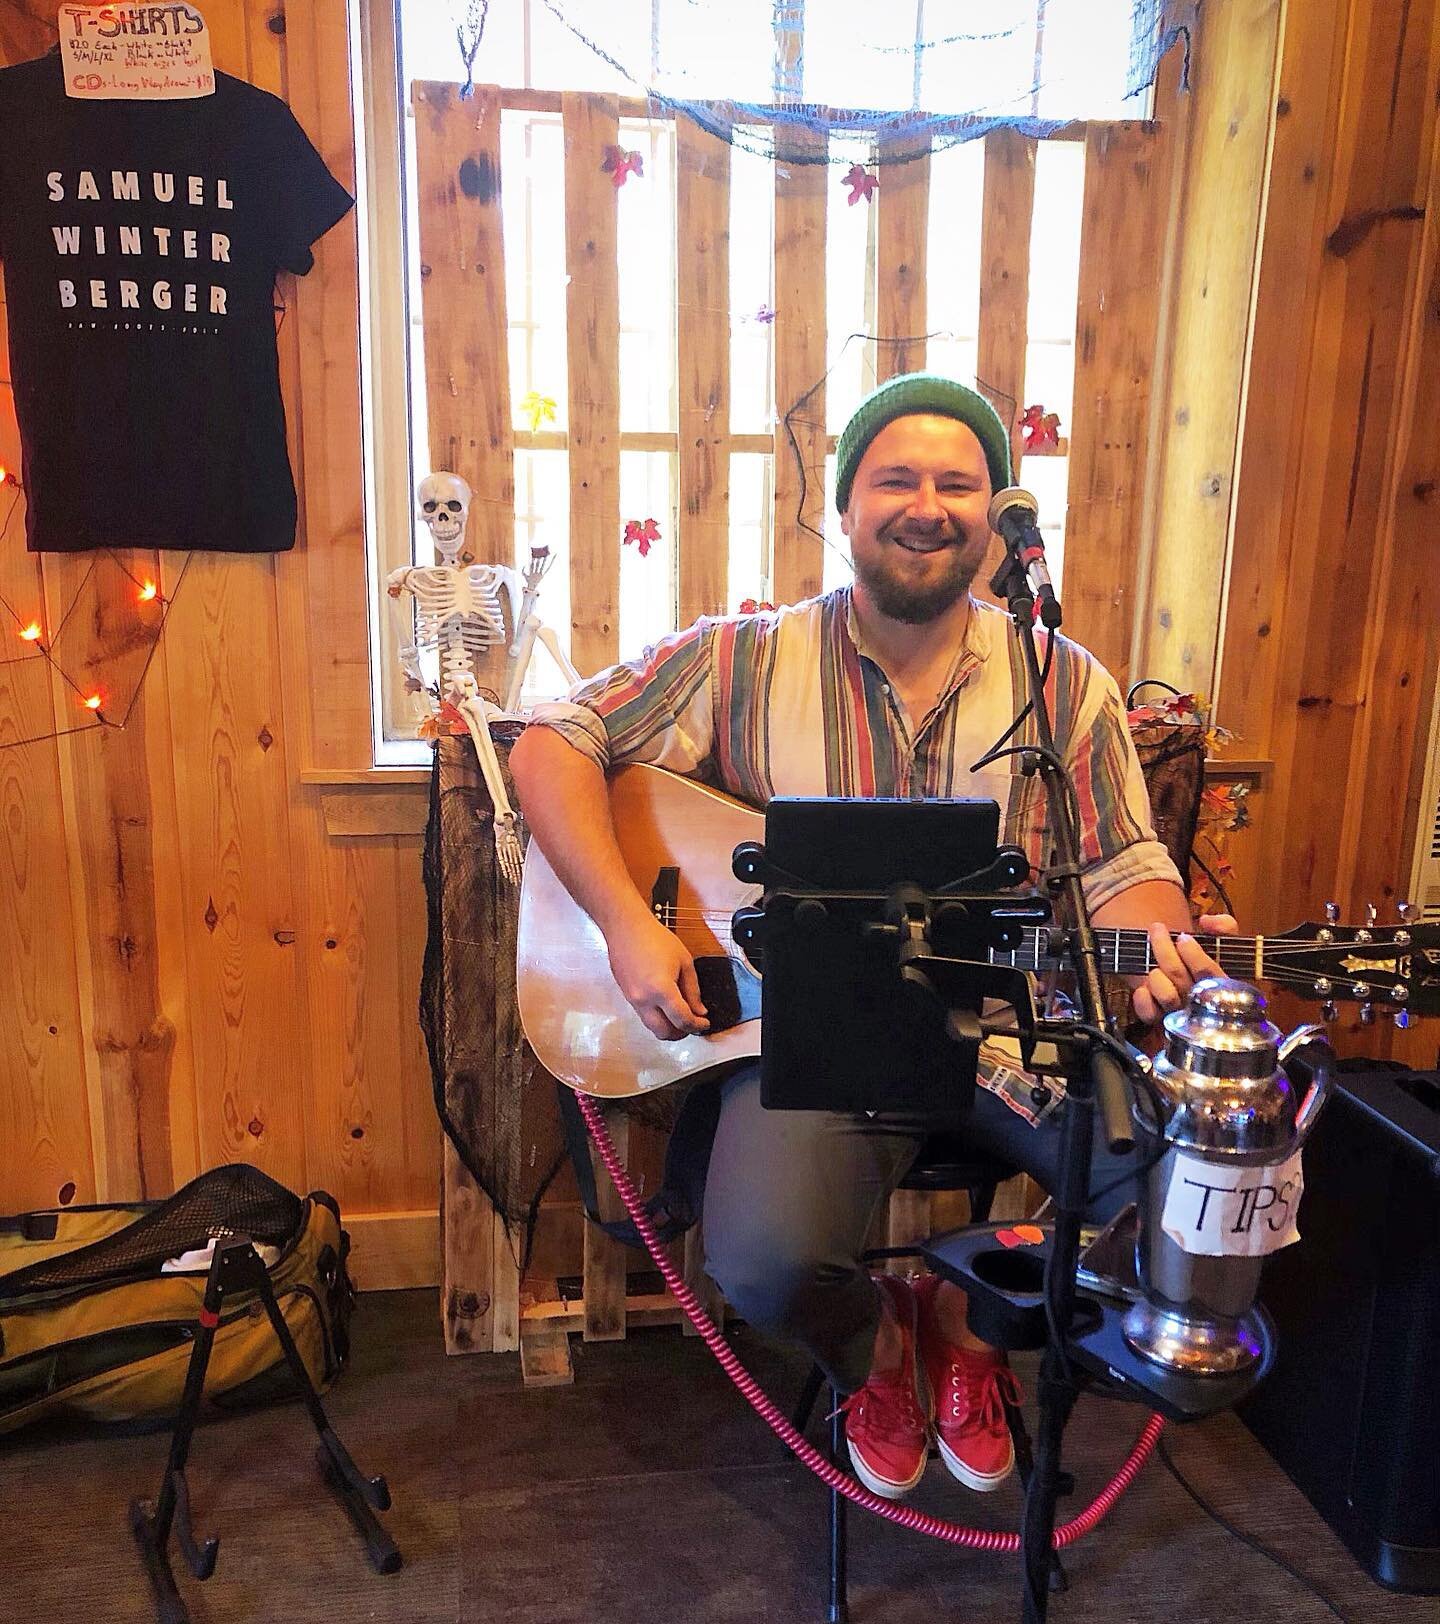 Fall is in full swing over at @stablewinery , so come on out, I&rsquo;ll be playing all the autumn tunes from 5:30-8:30!
Come hang out!